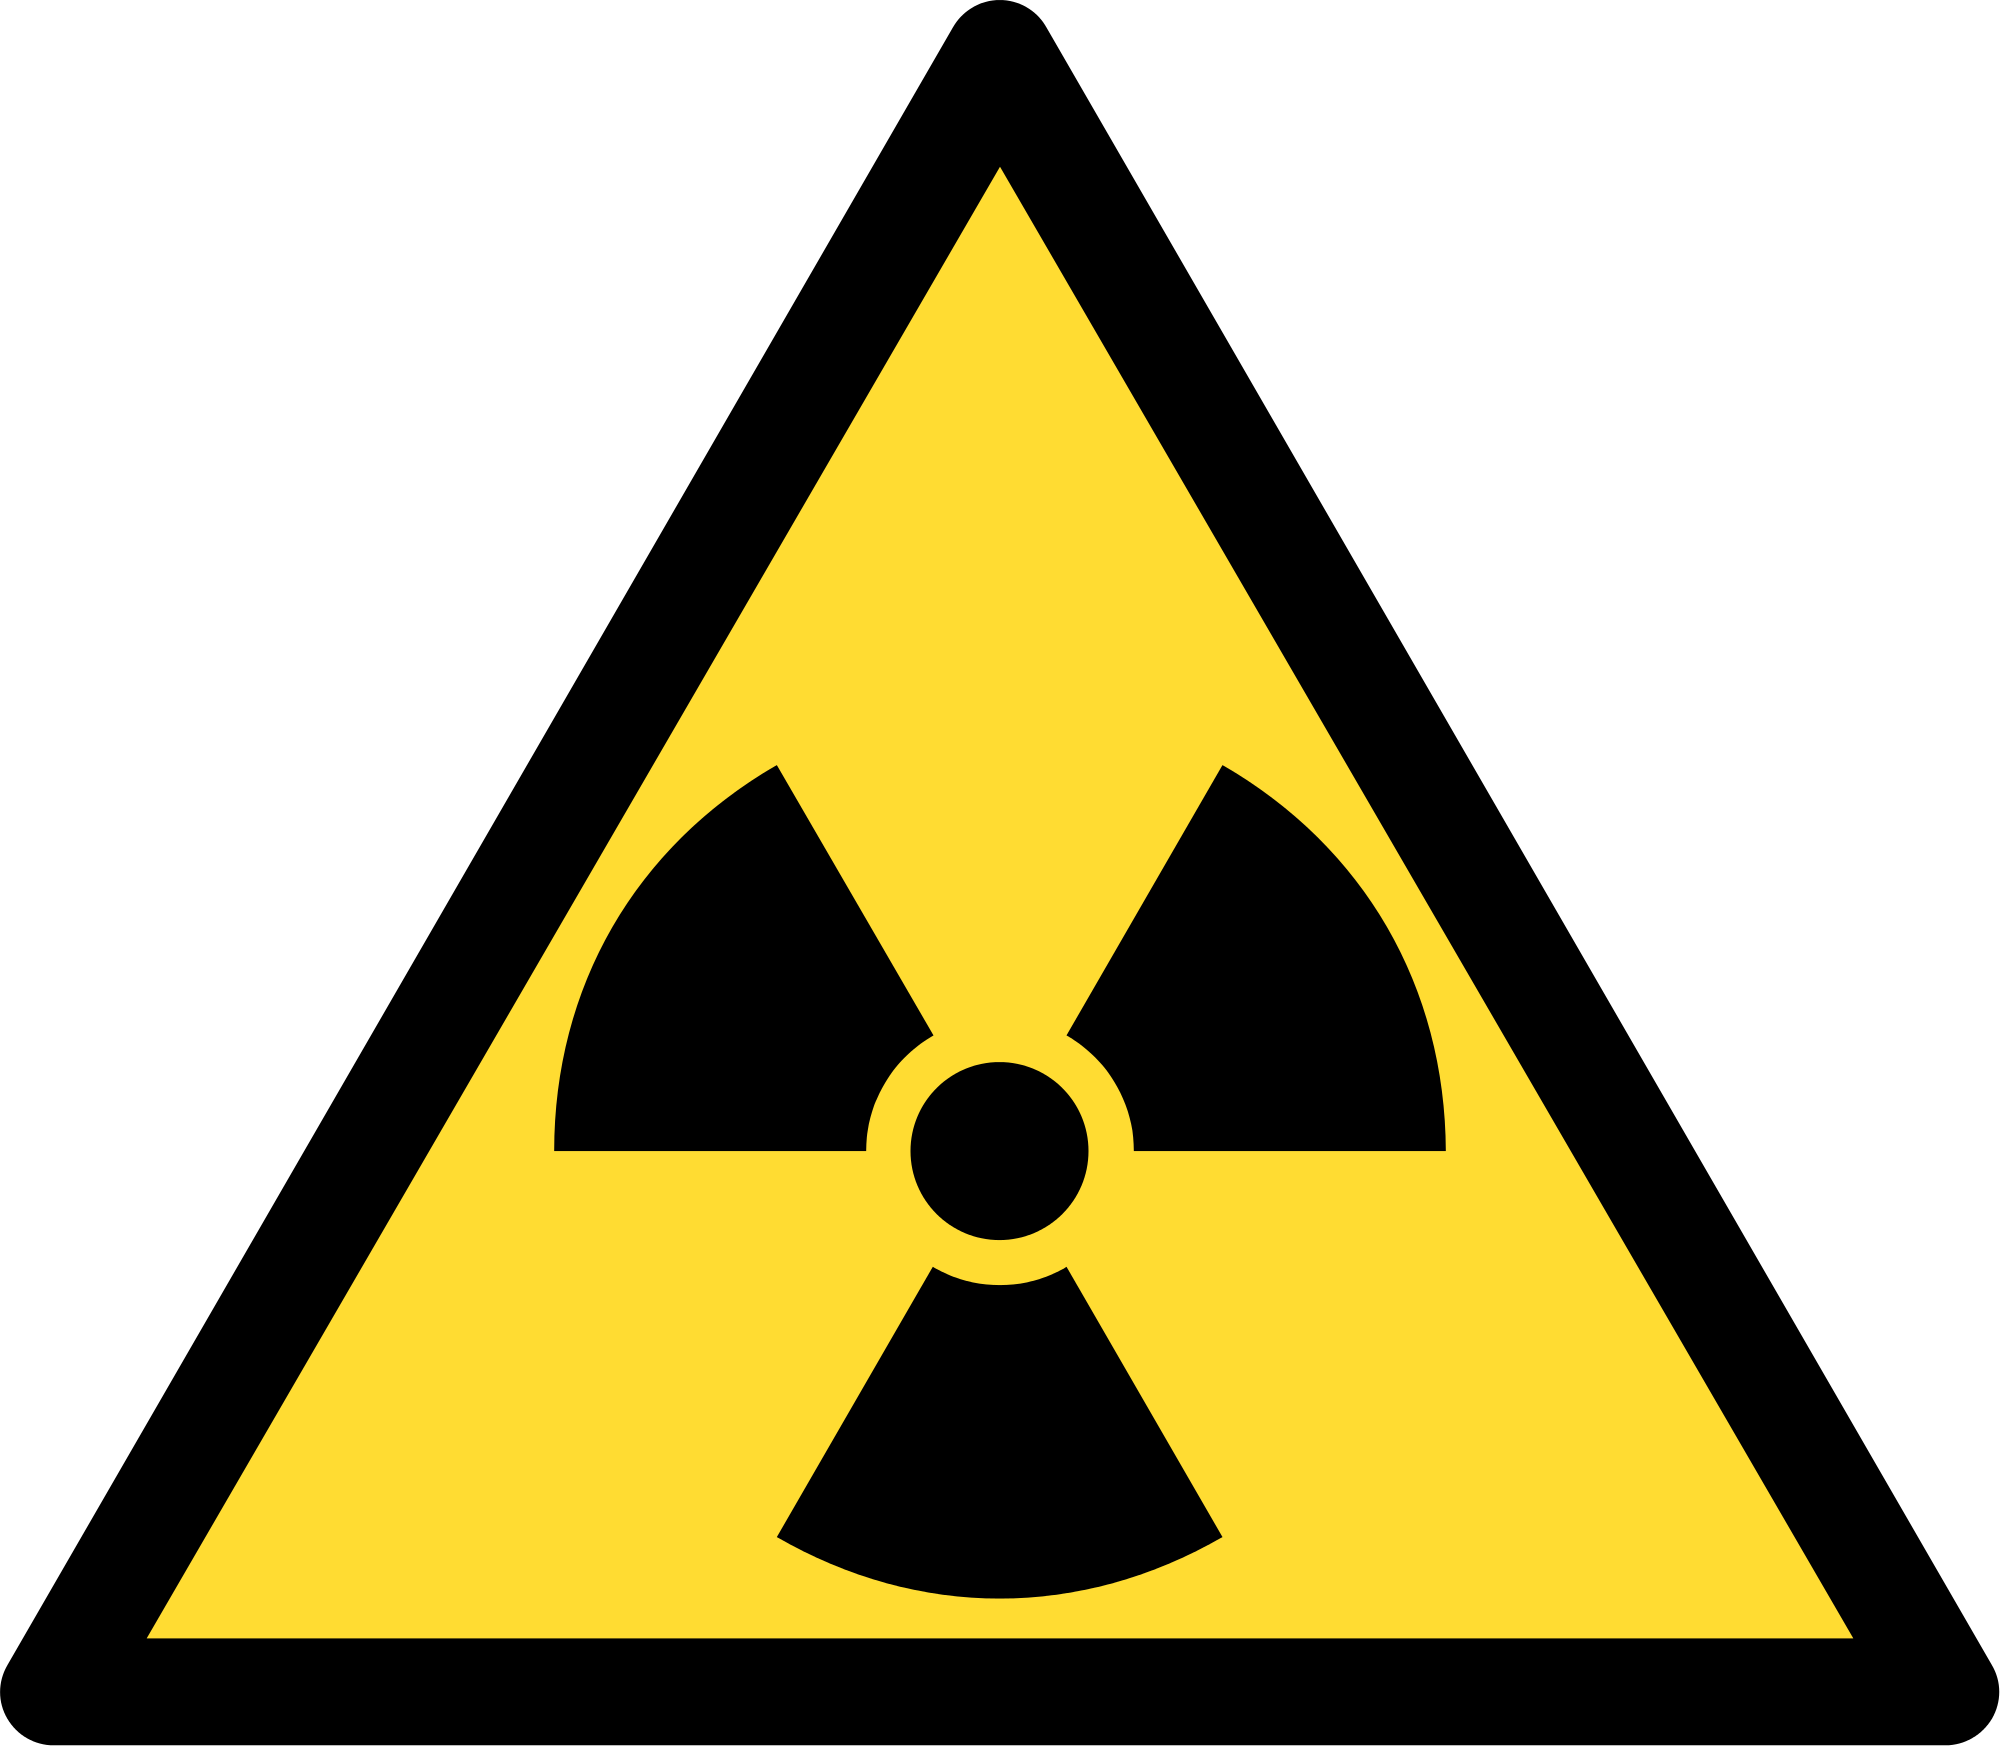 radiation clipart symbol radiology chemical oil symbols spilled science bad vulnerability clip nuclear transparent warning reliance spill genesis testament emaze